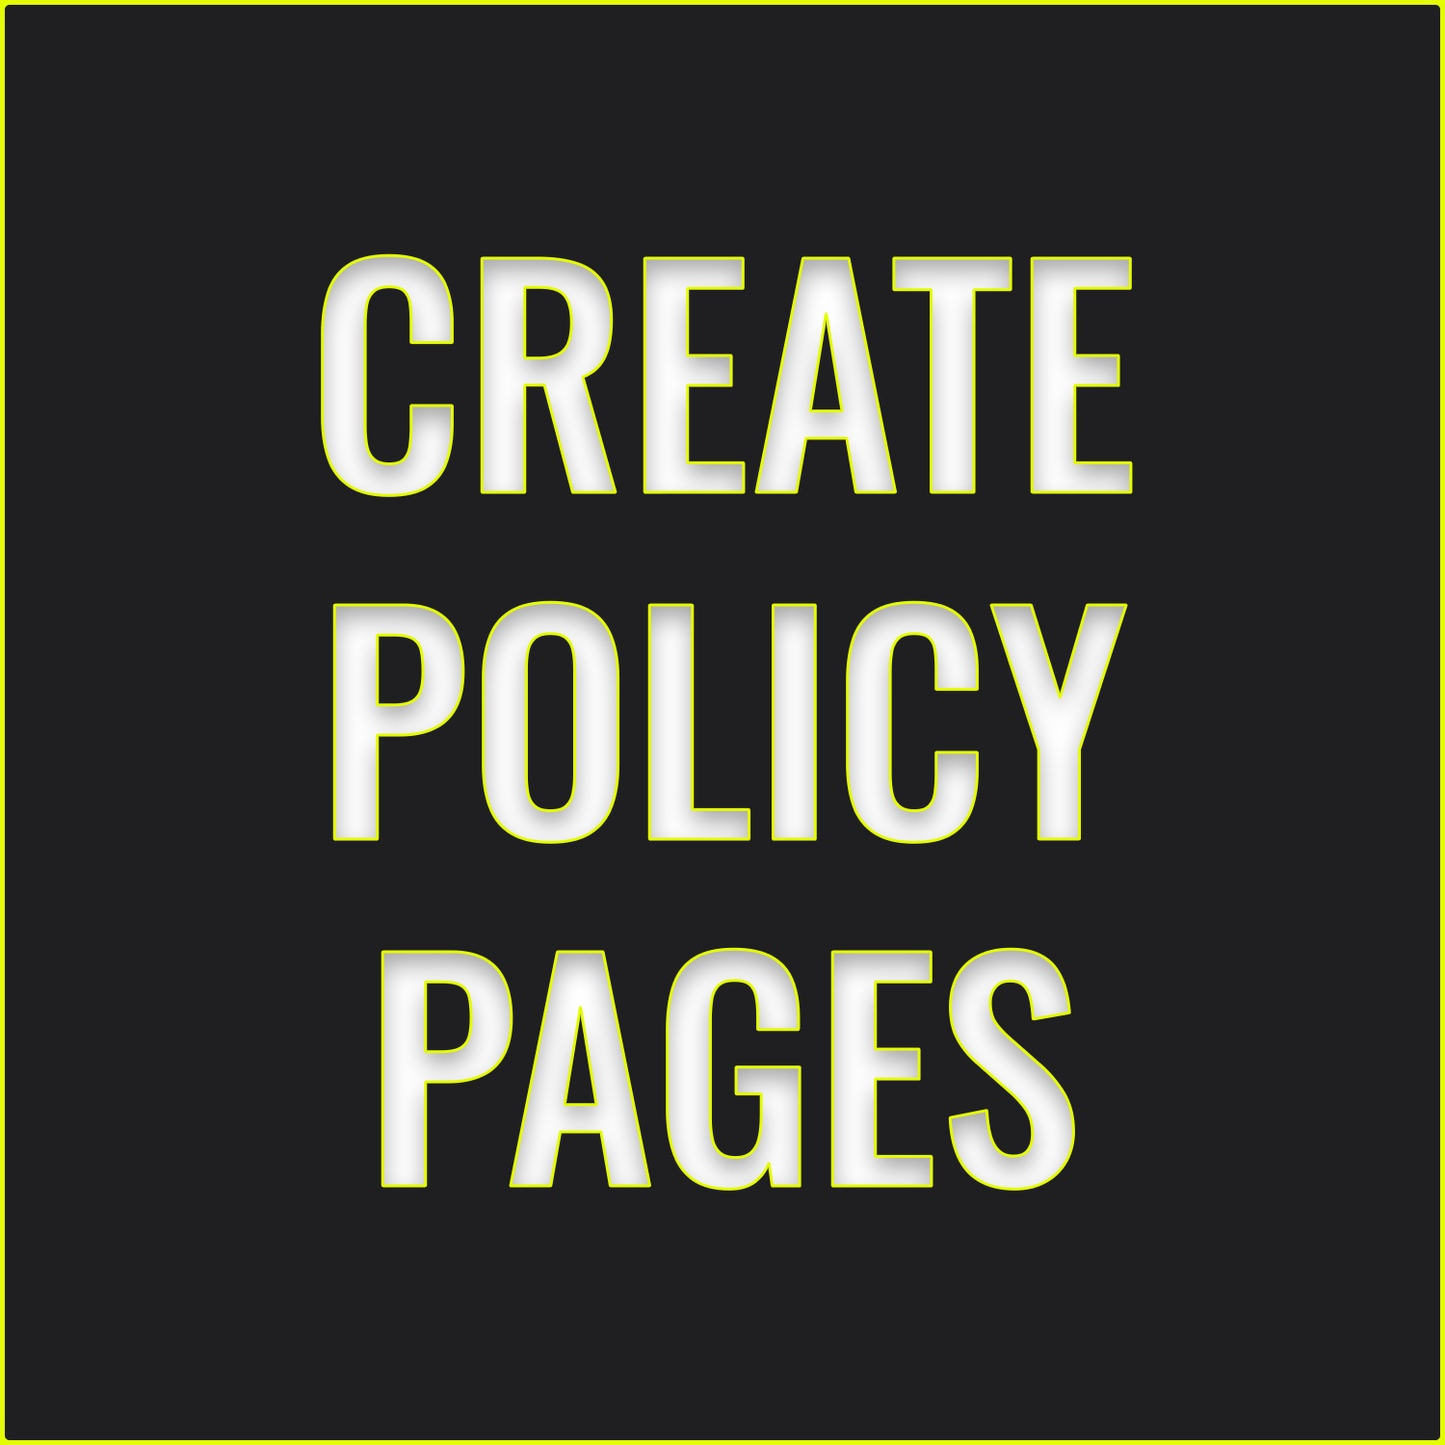 Create Policy Pages For Website - Privacy Policy, Refund Policy, Terms Of Service, And Shipping Policy